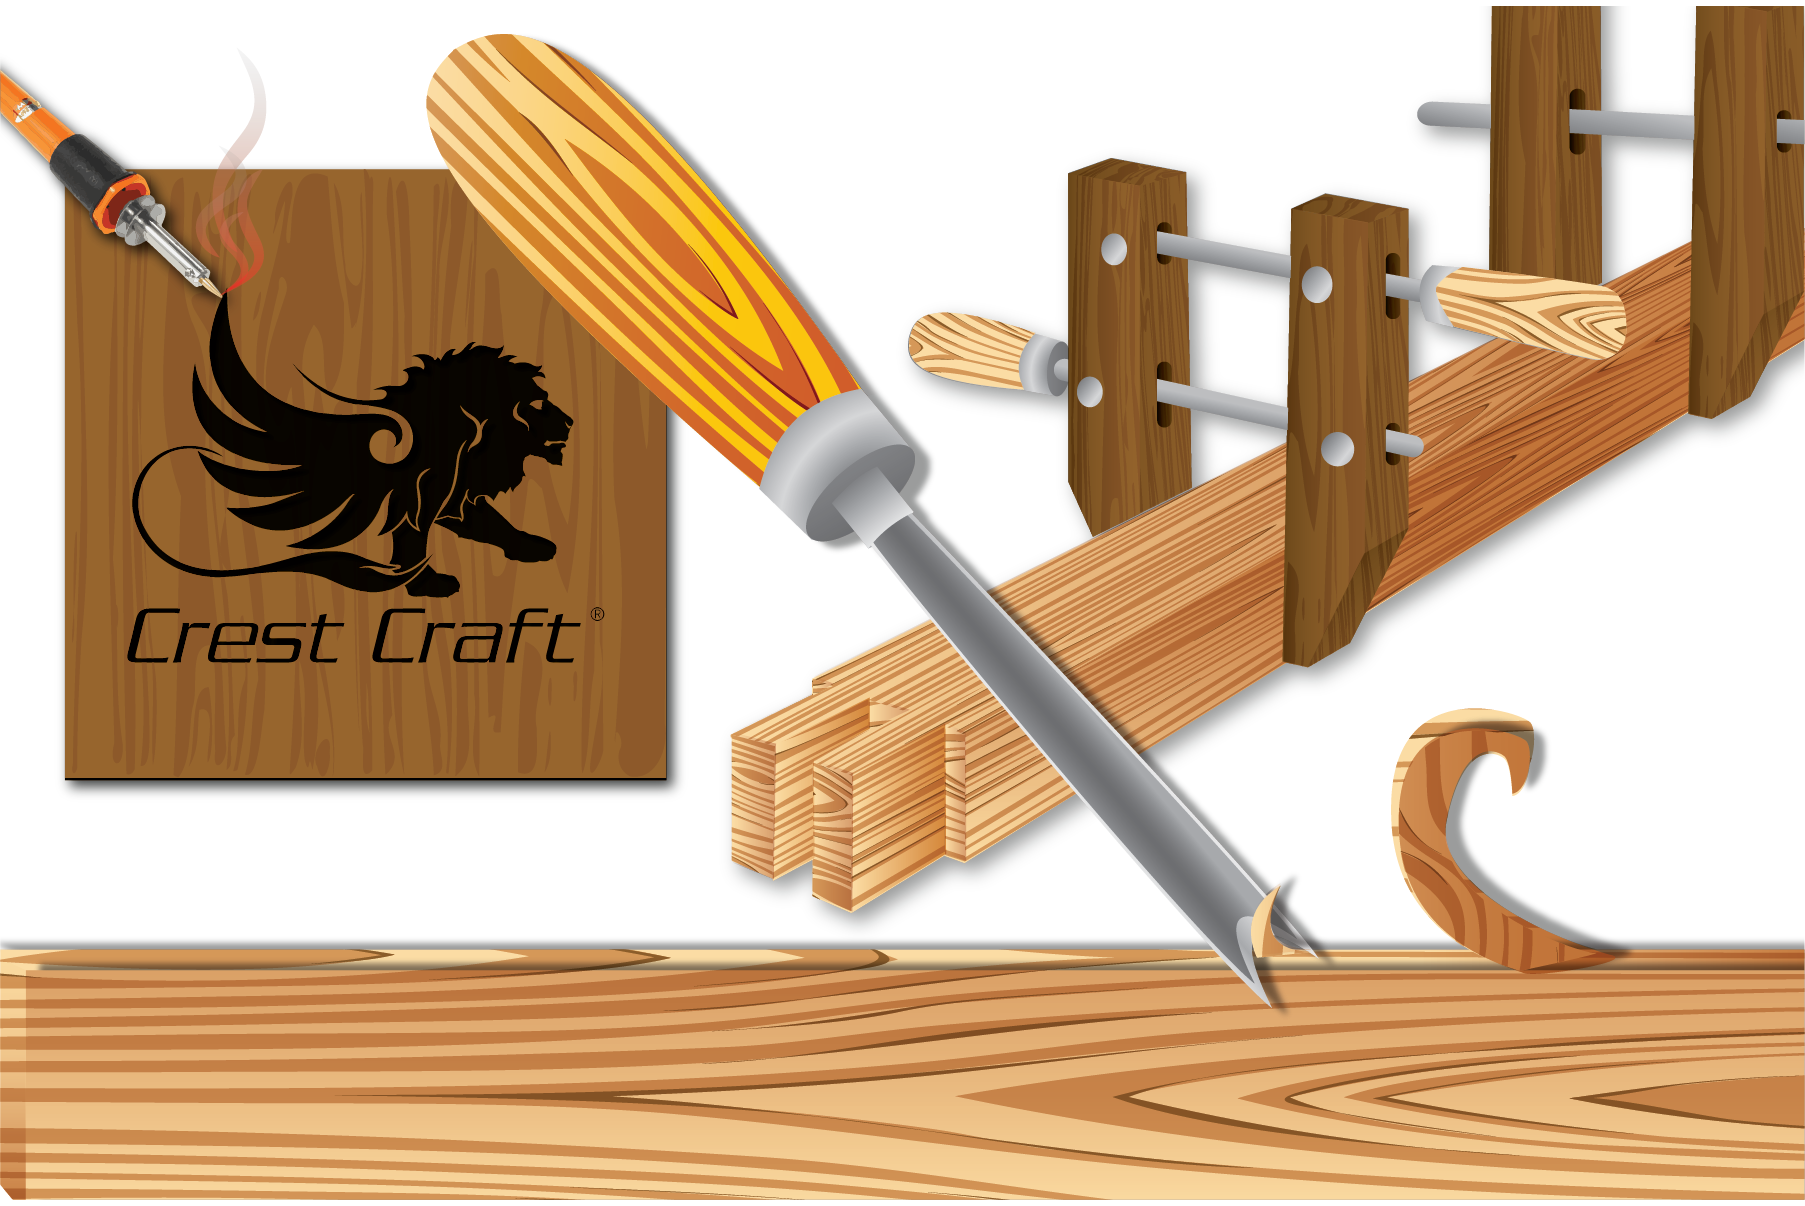 Illustration Showing Woodworking Capabilities